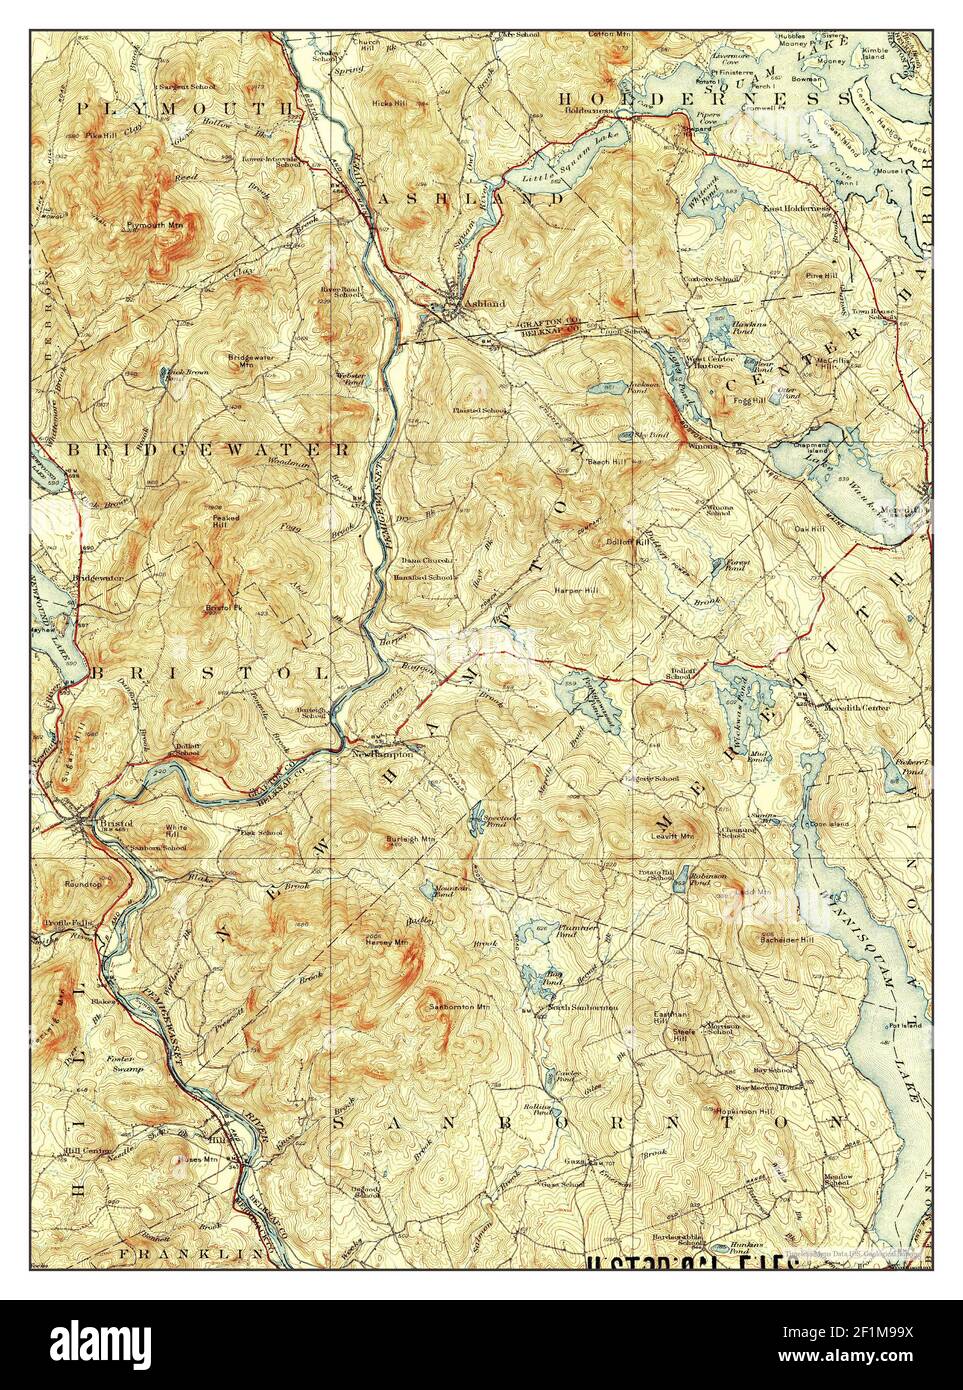 Holderness, New Hampshire, map 1927, 1:62500, United States of America by Timeless Maps, data U.S. Geological Survey Stock Photo